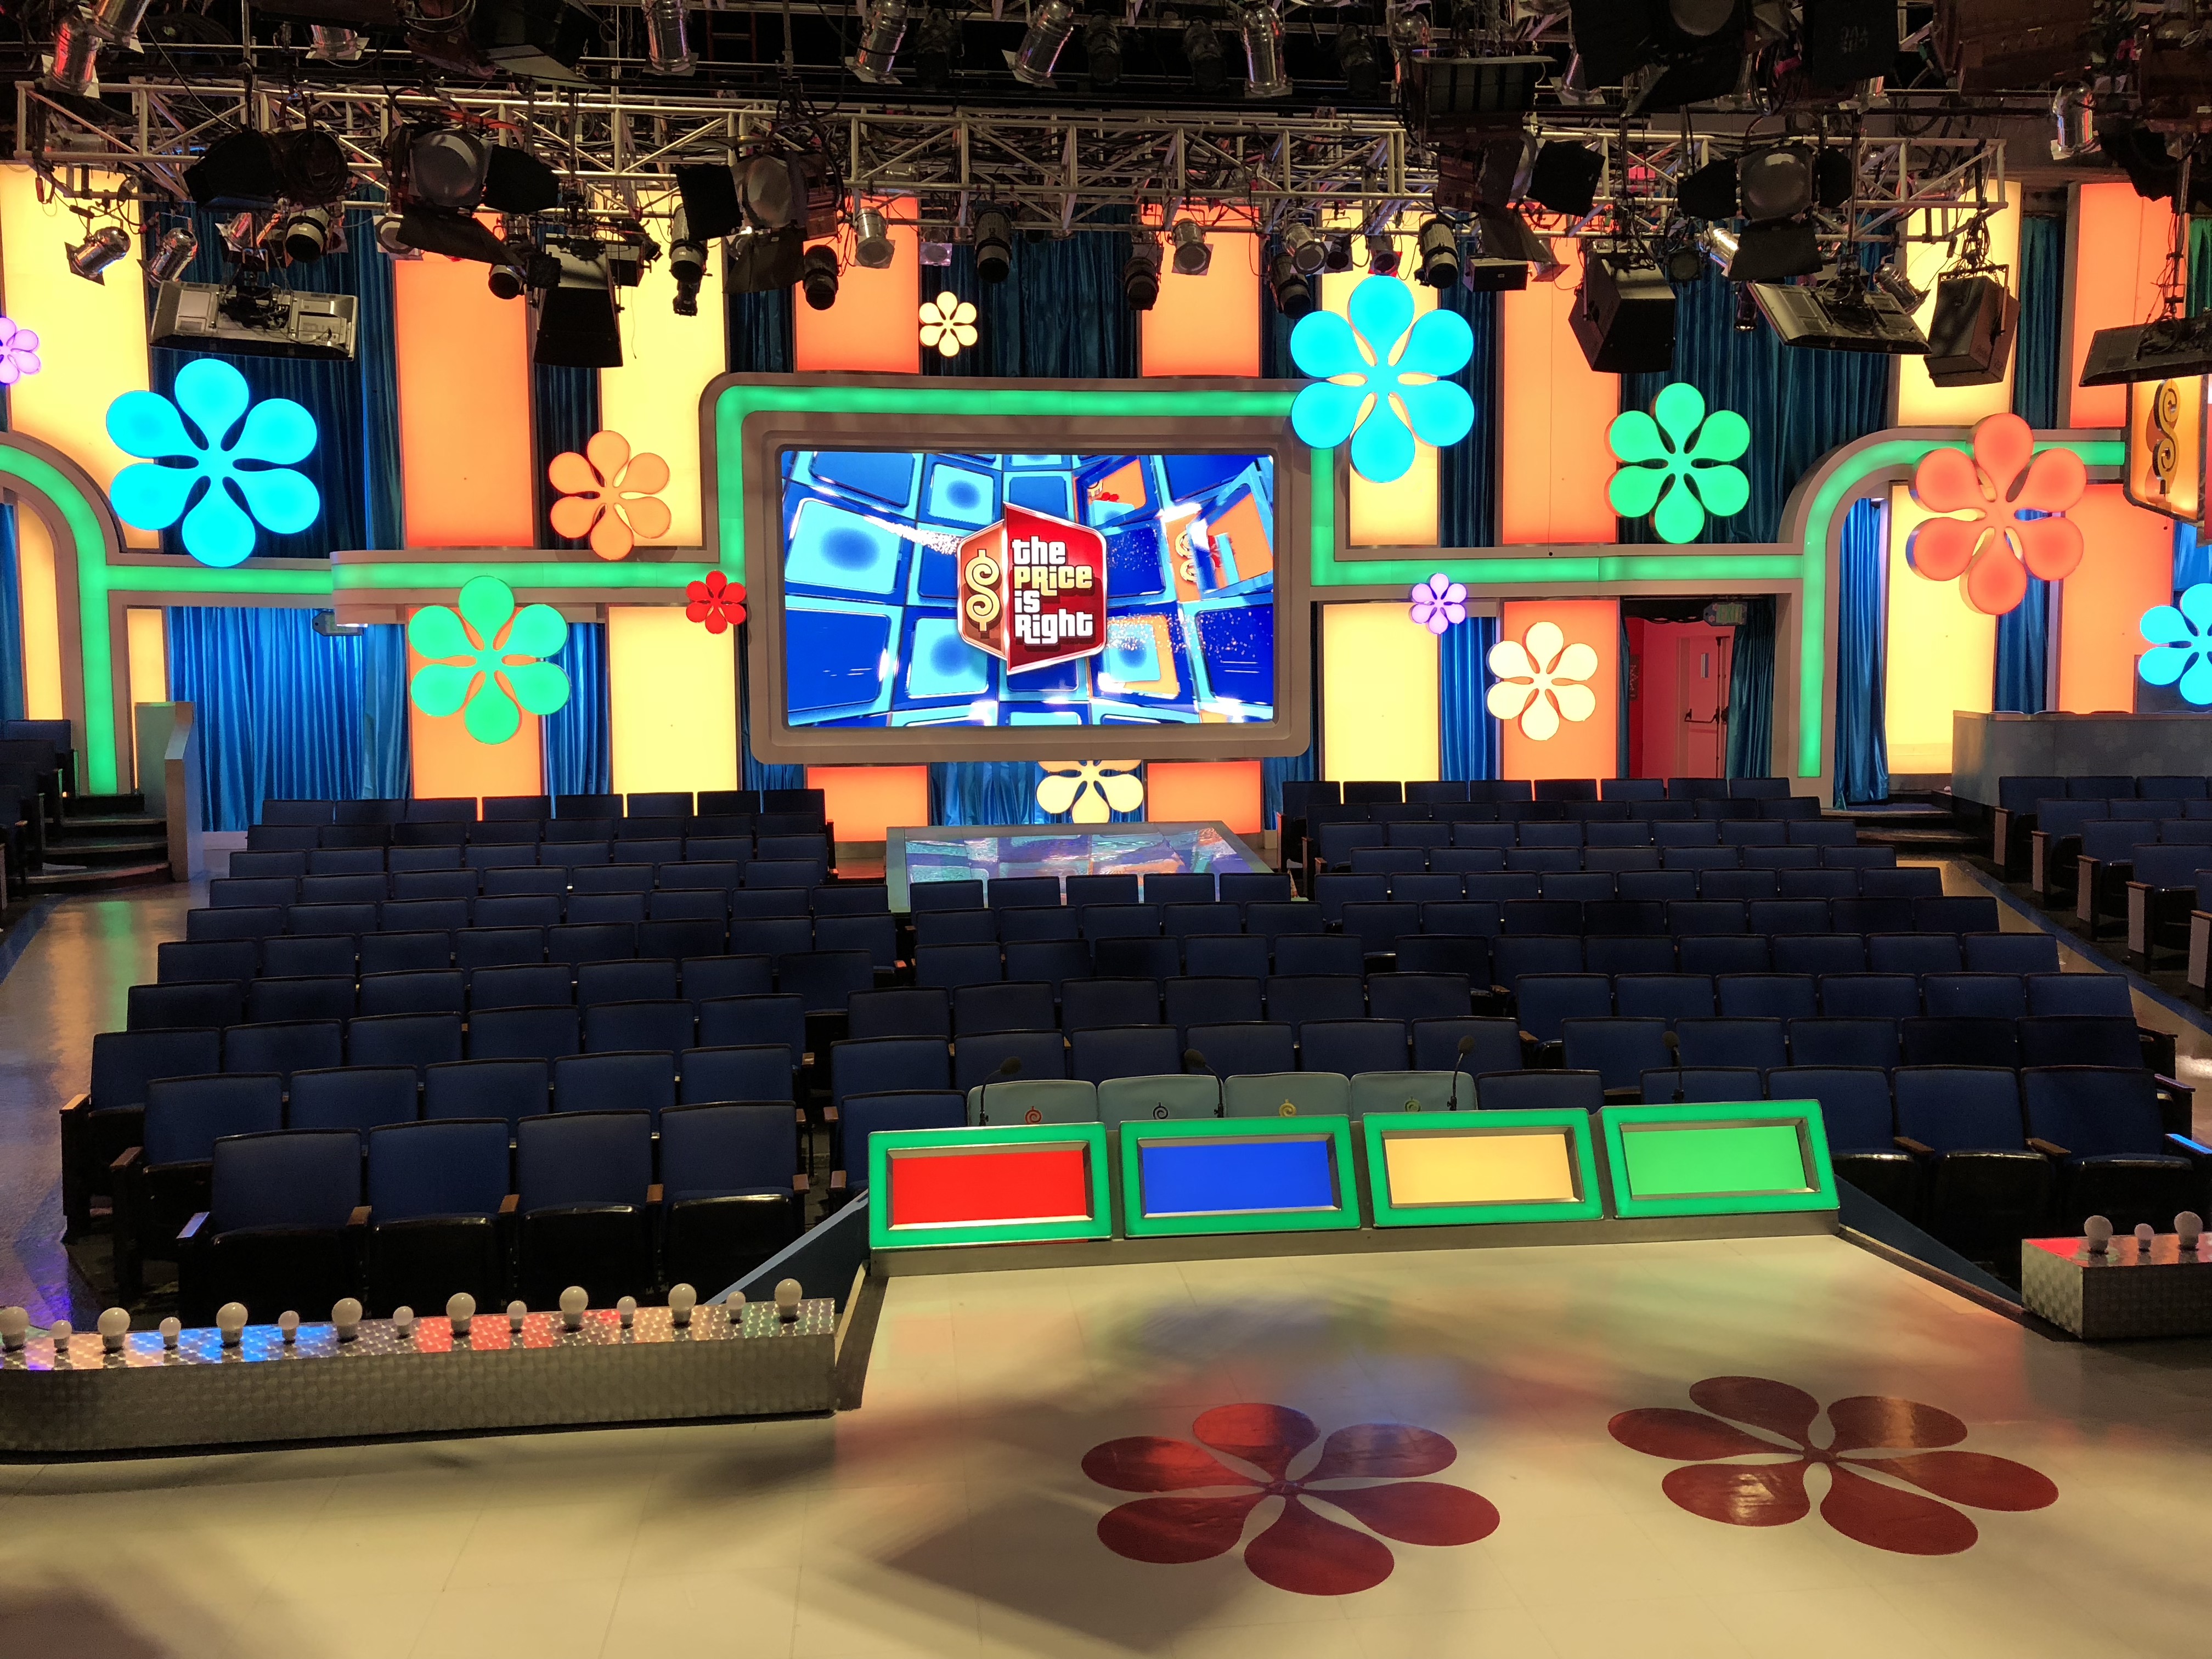 the view from the stage at The Price is Right